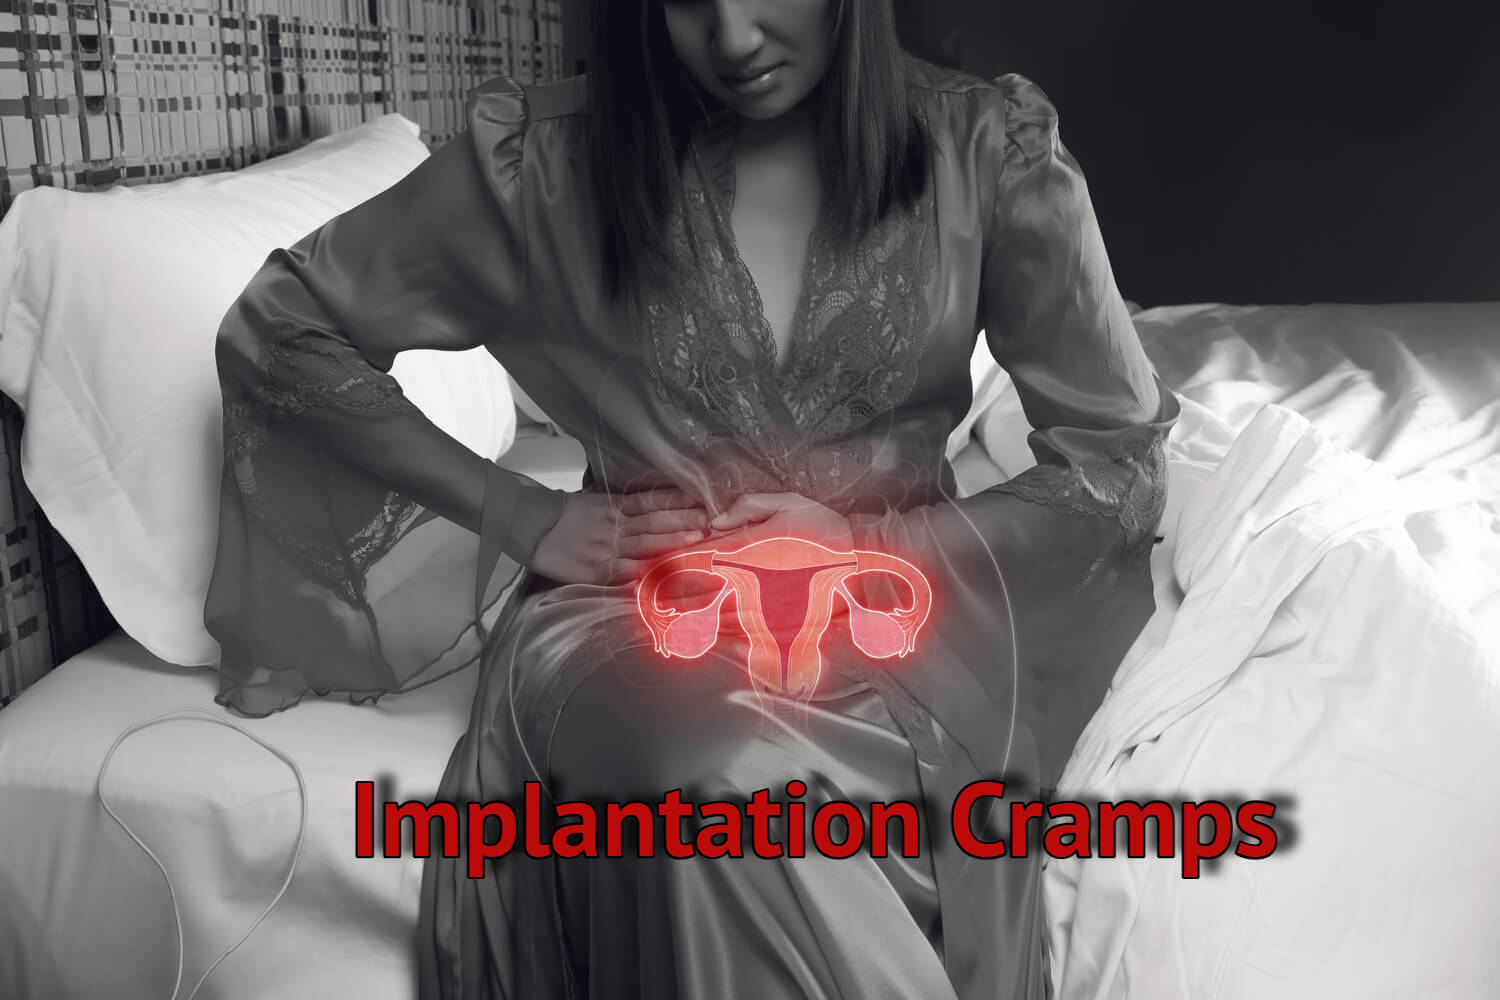 How Long Do Implantation Cramps Last In Early Pregnancy?